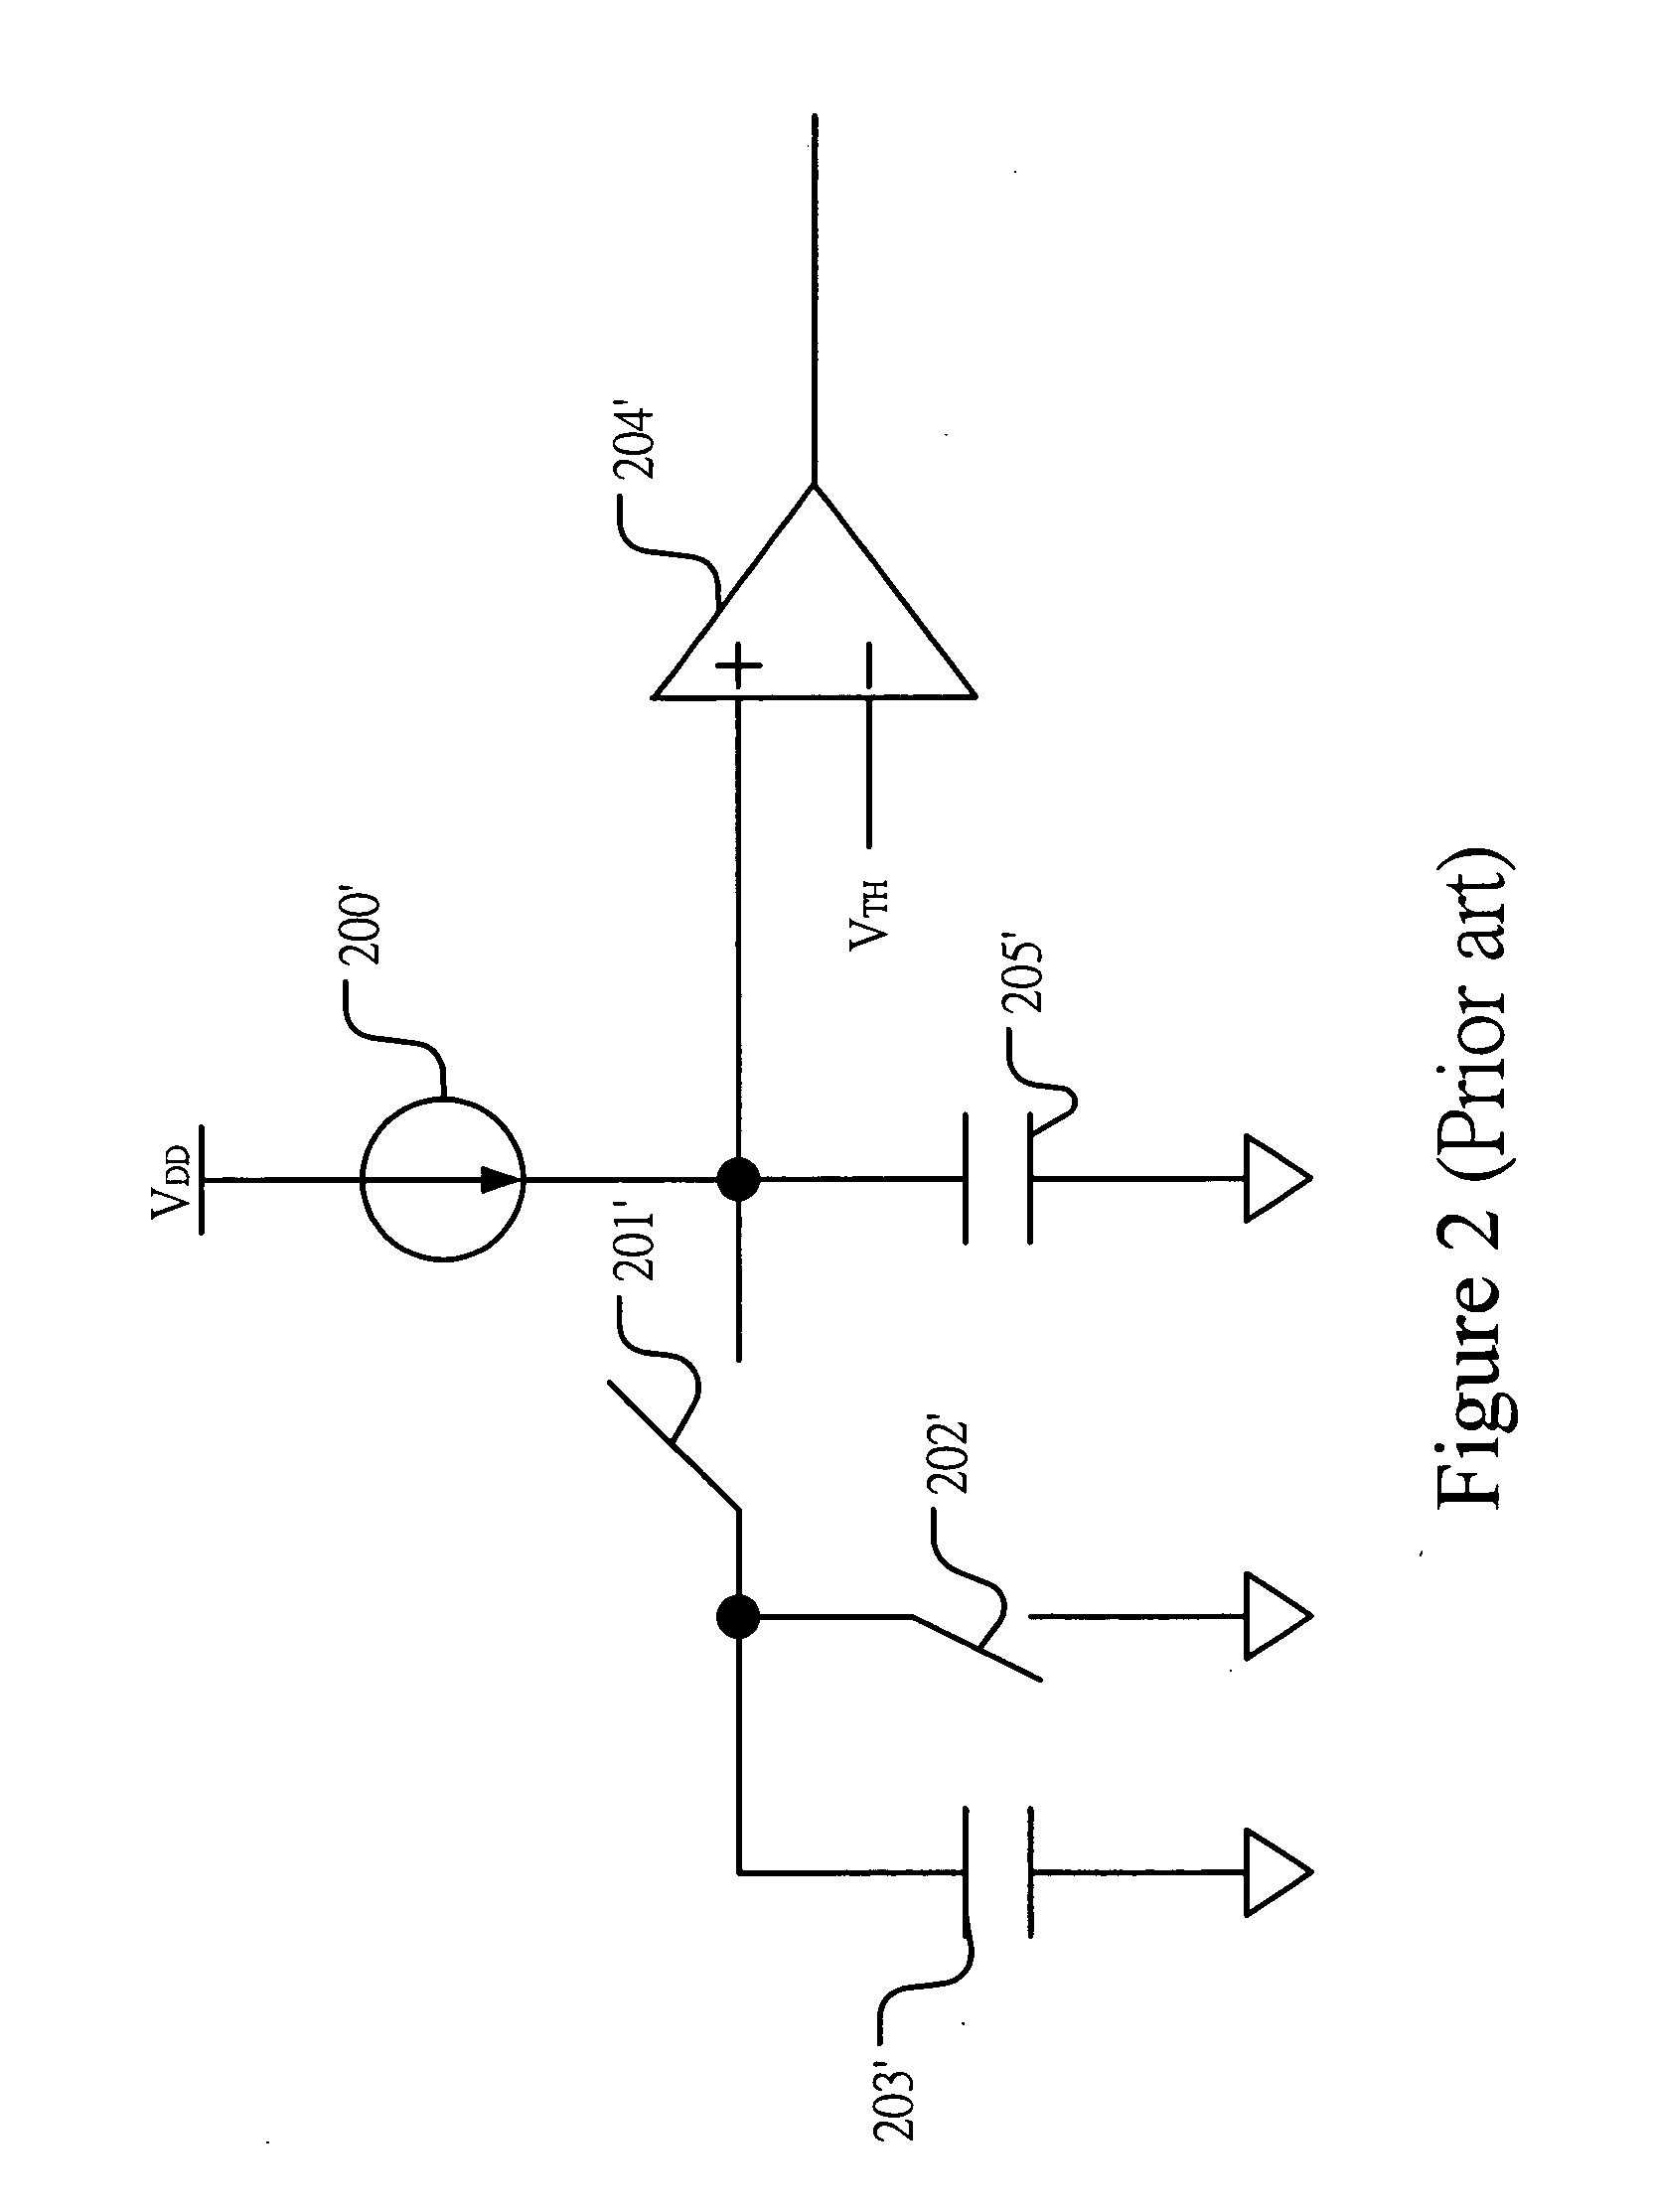 Capacitance sensing circuit with Anti-electromagnetic interference capability